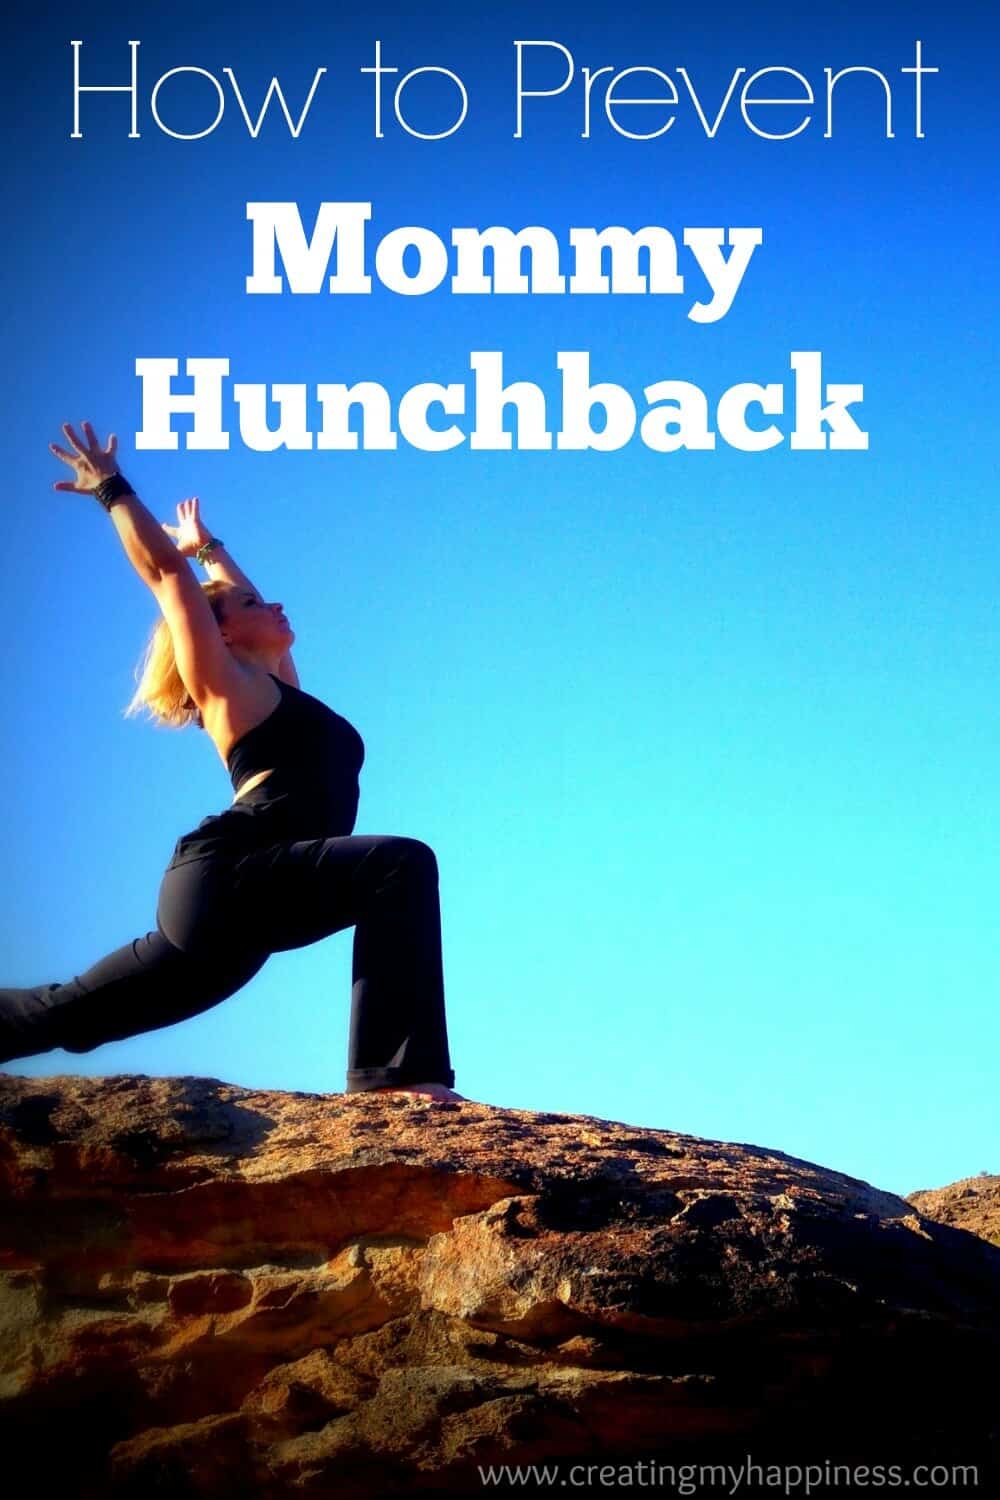 Don't let all the cuddling, carrying, and crouching give you mommy hunchback. Take care of your posture with these simple, do-them-anywhere stretches.